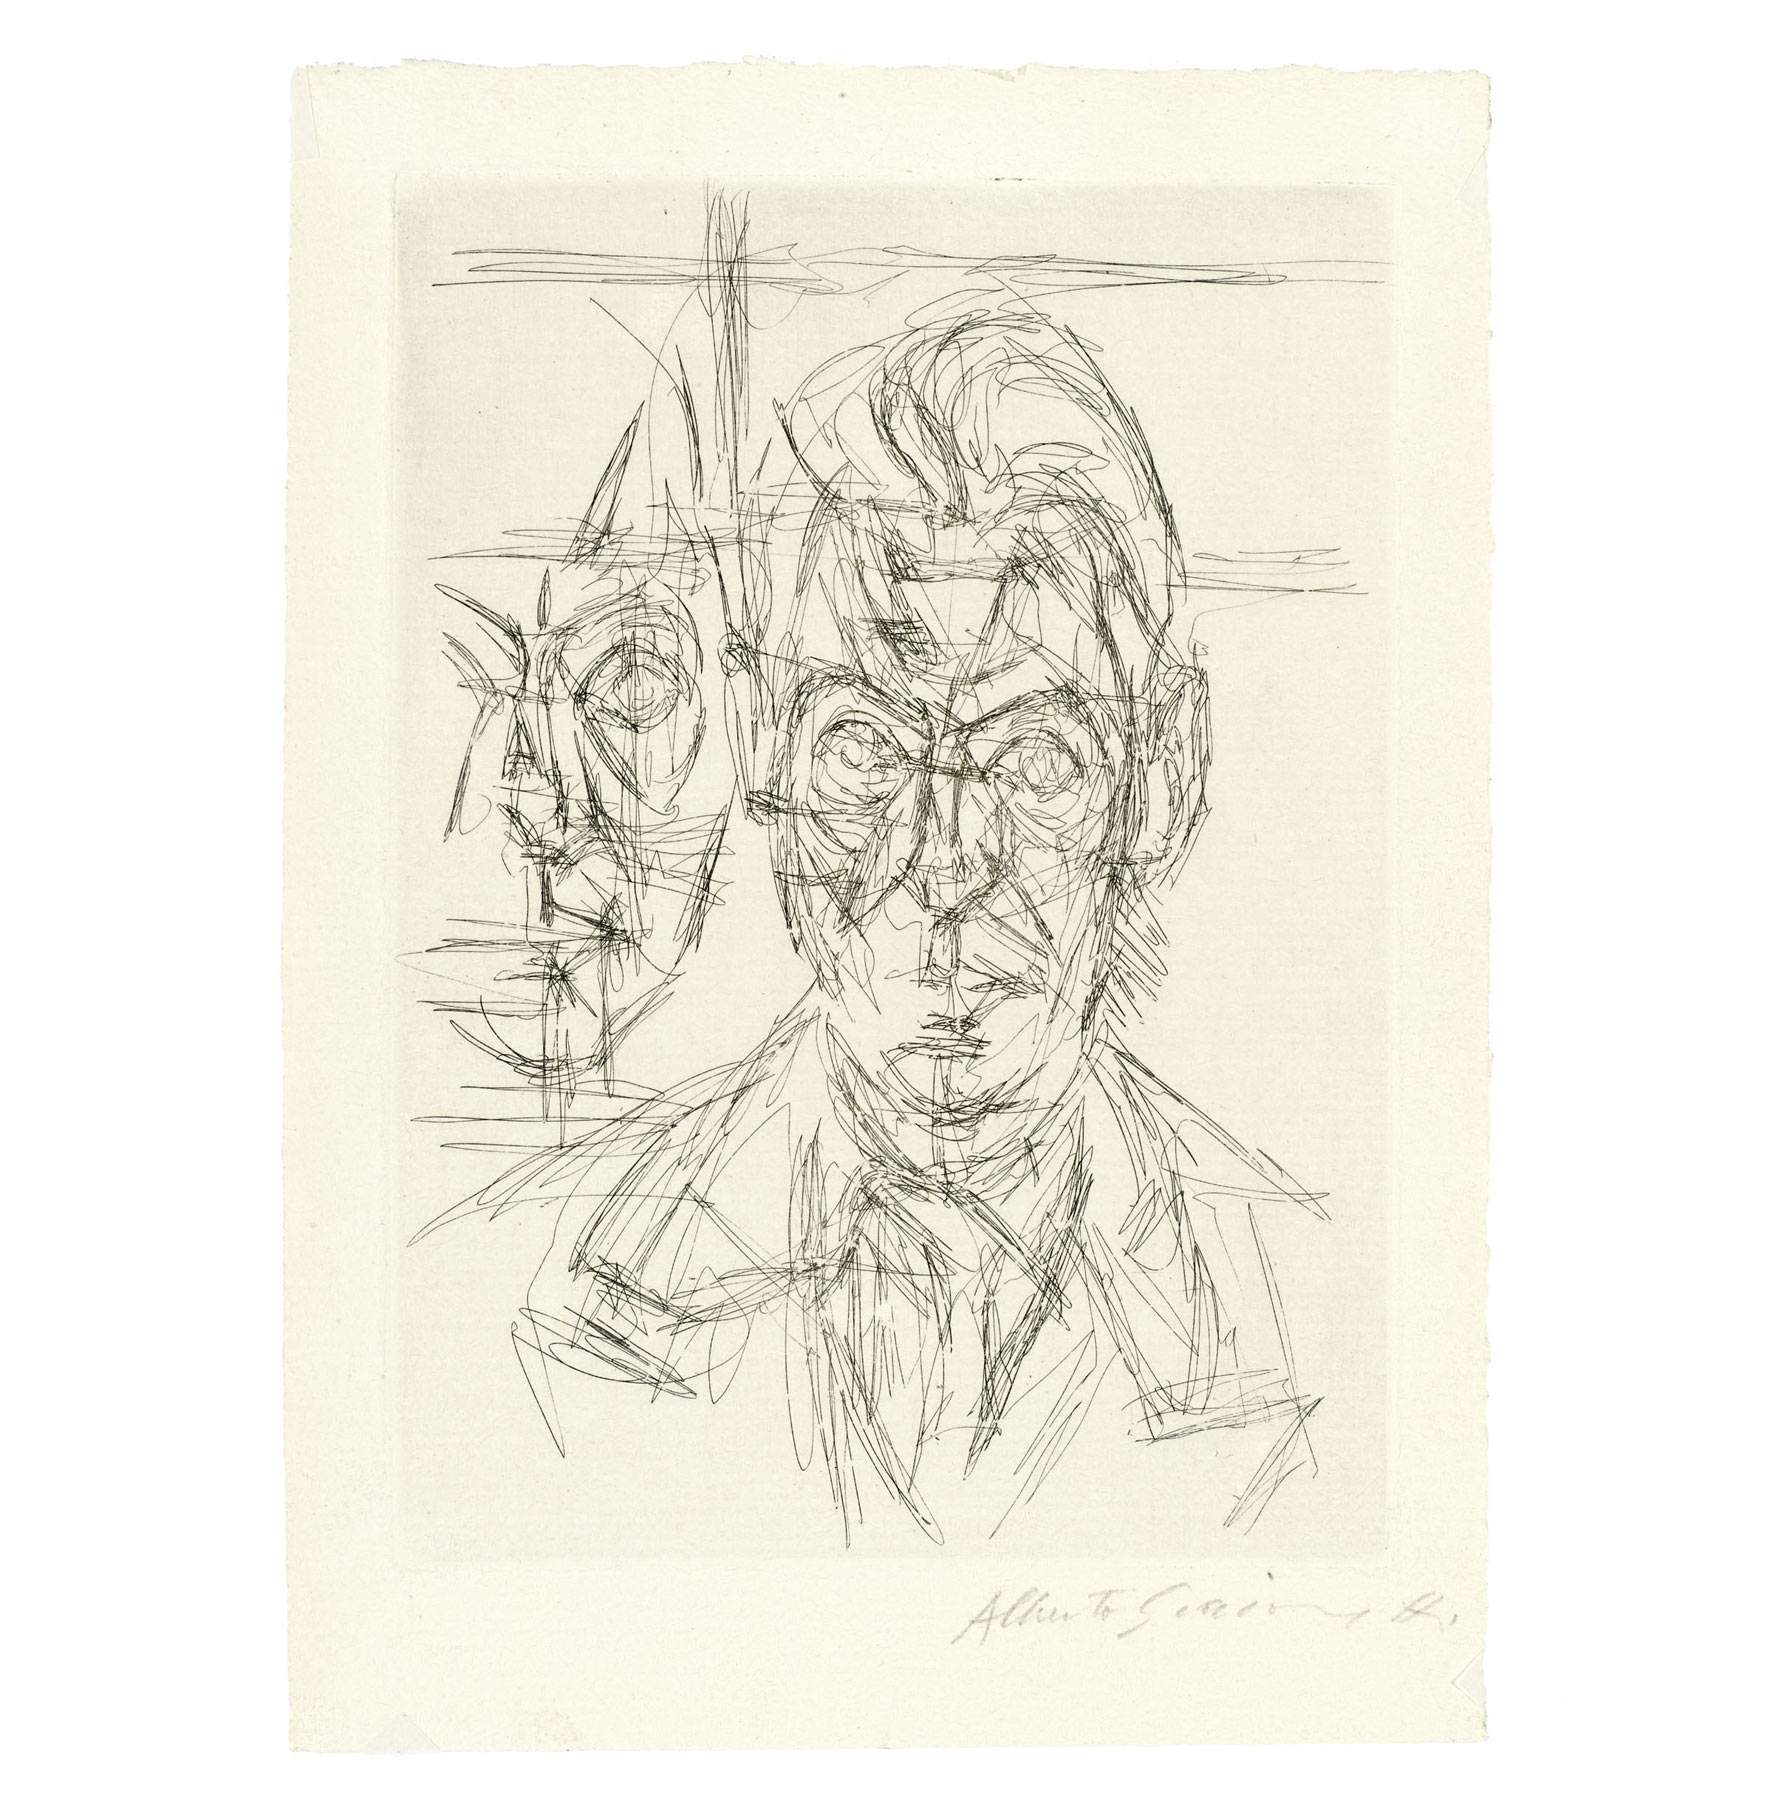 Alberto Giacometti's entire graphic corpus goes on display for the first time: over 400 sheets on display